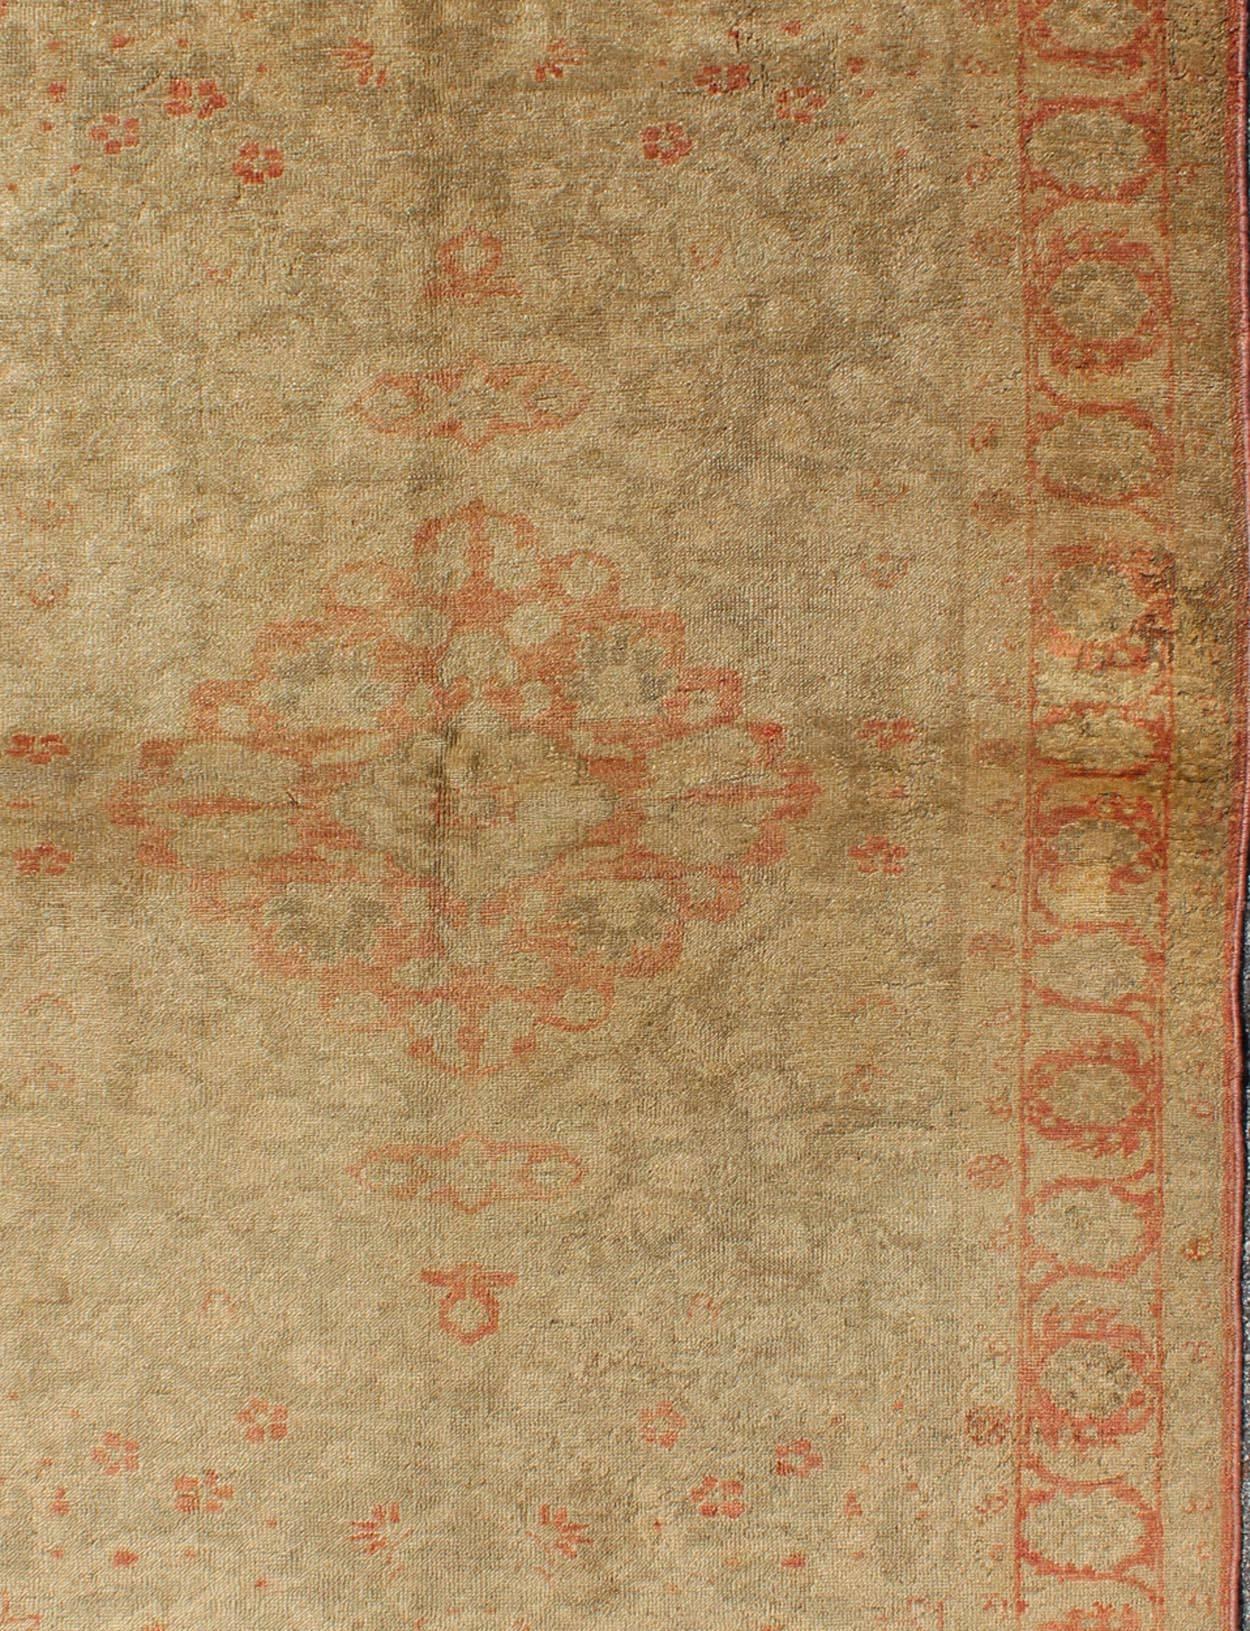 Turkish Muted Fine-Weave Sivas Rug with Botanical and Floral Elements in Red & Tan For Sale